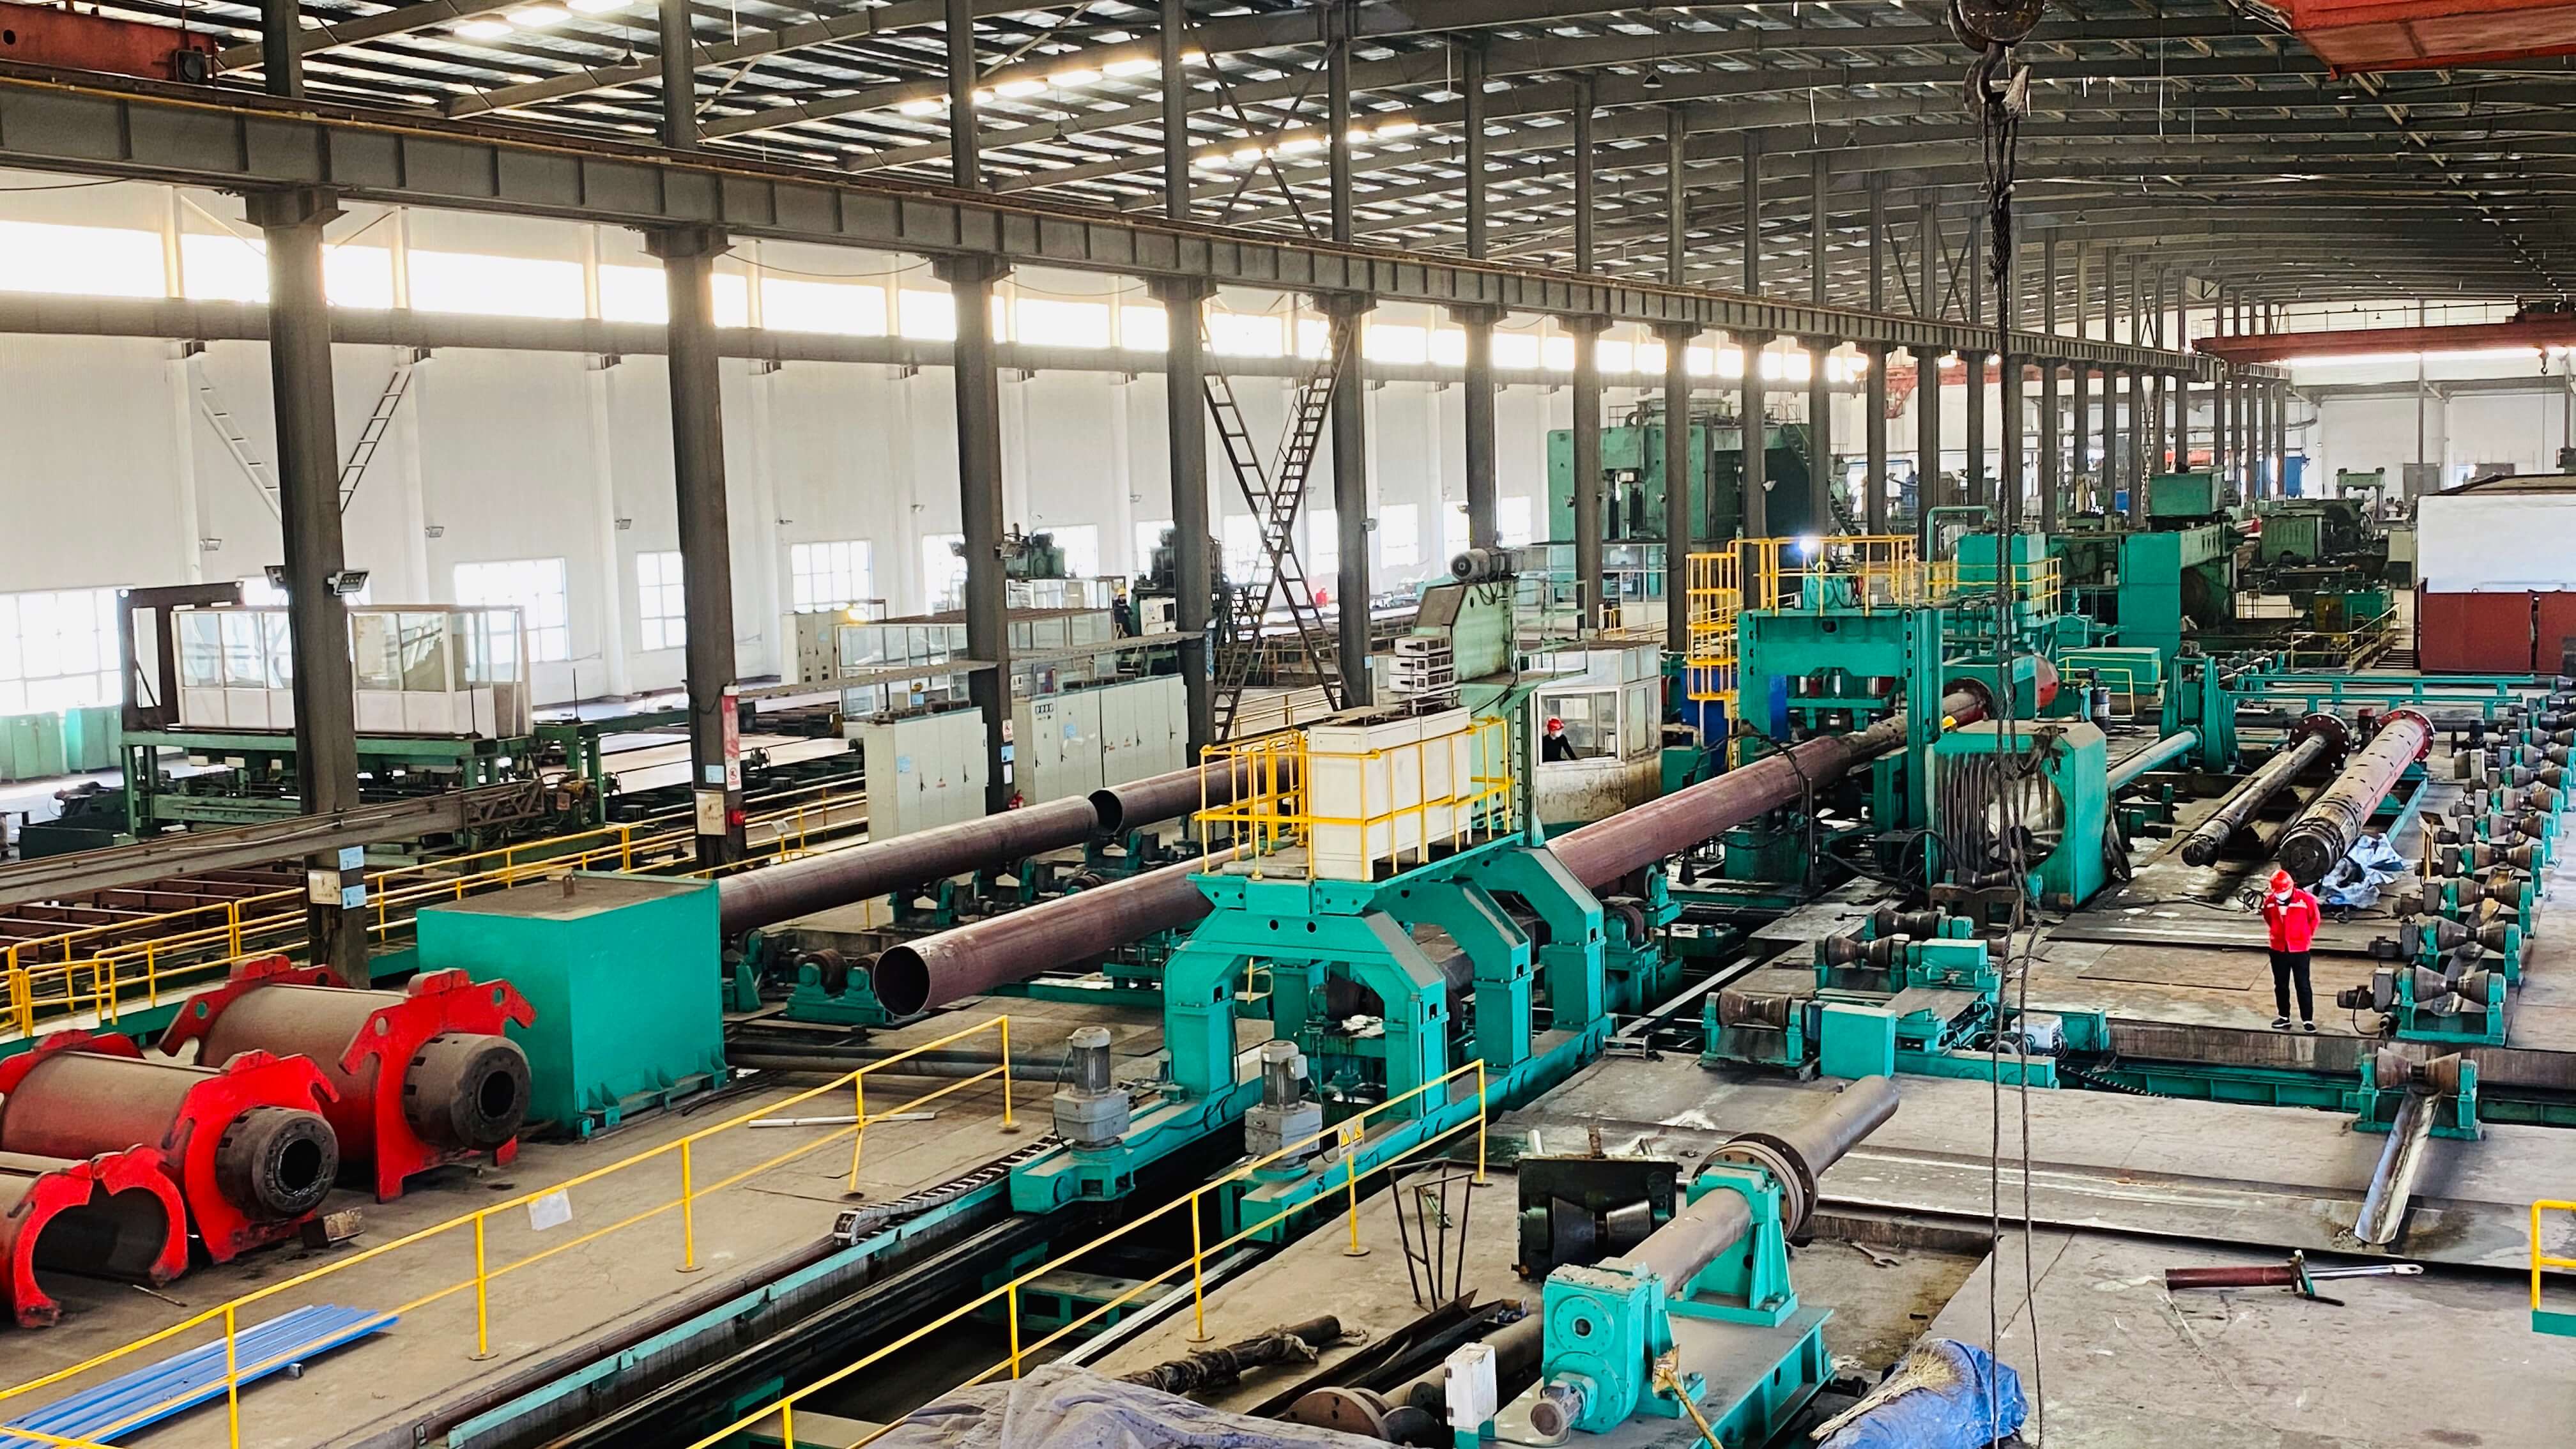 https://www.botopsteelpipe.com/news/api-5l-pipe-specification-46th-edition/